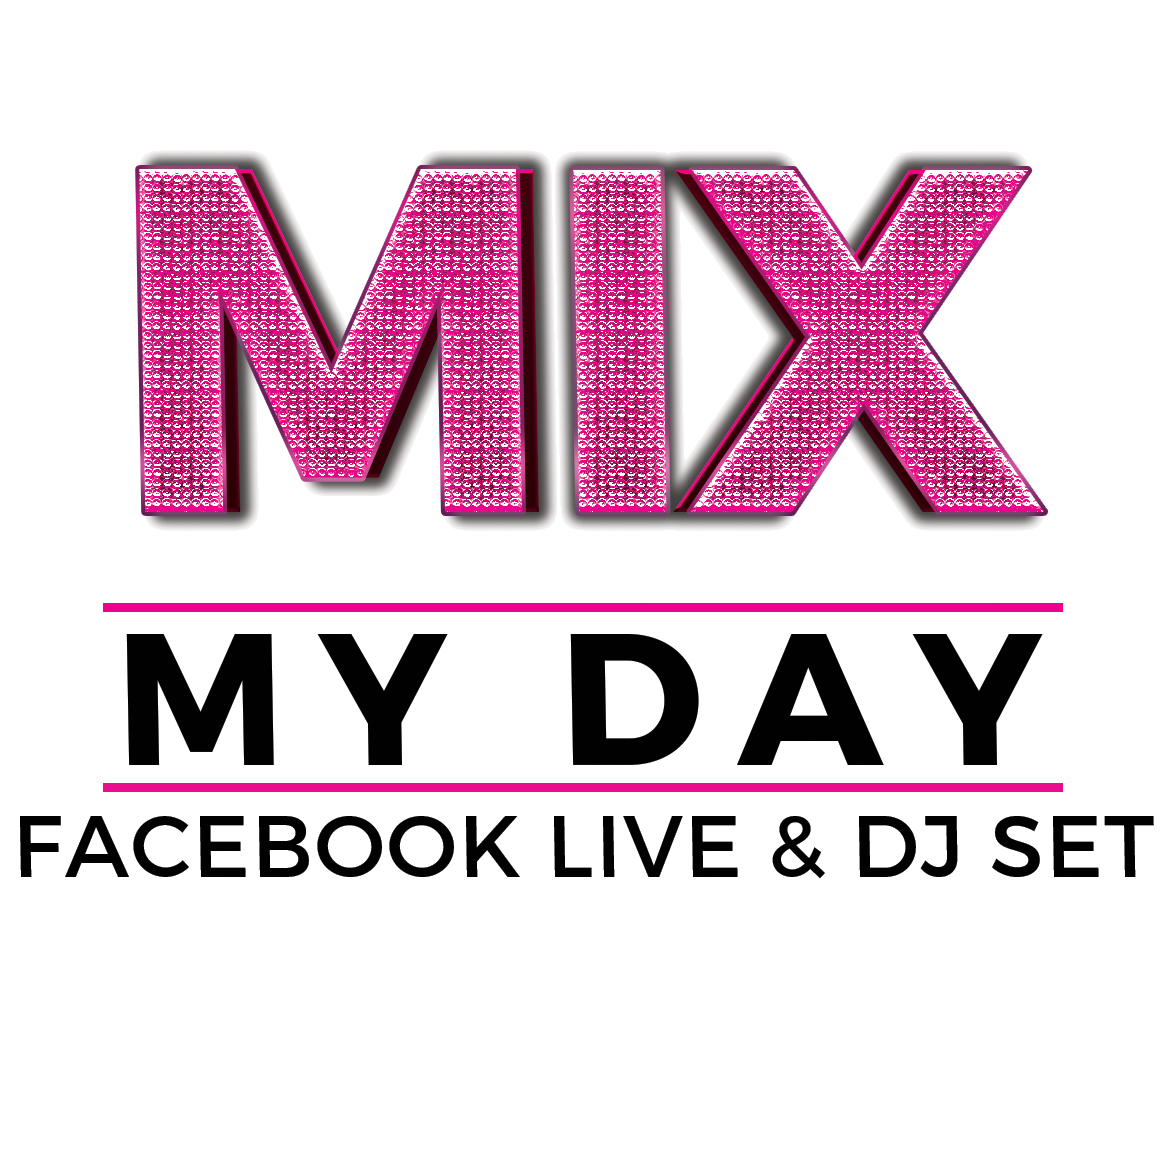 Mix My Day